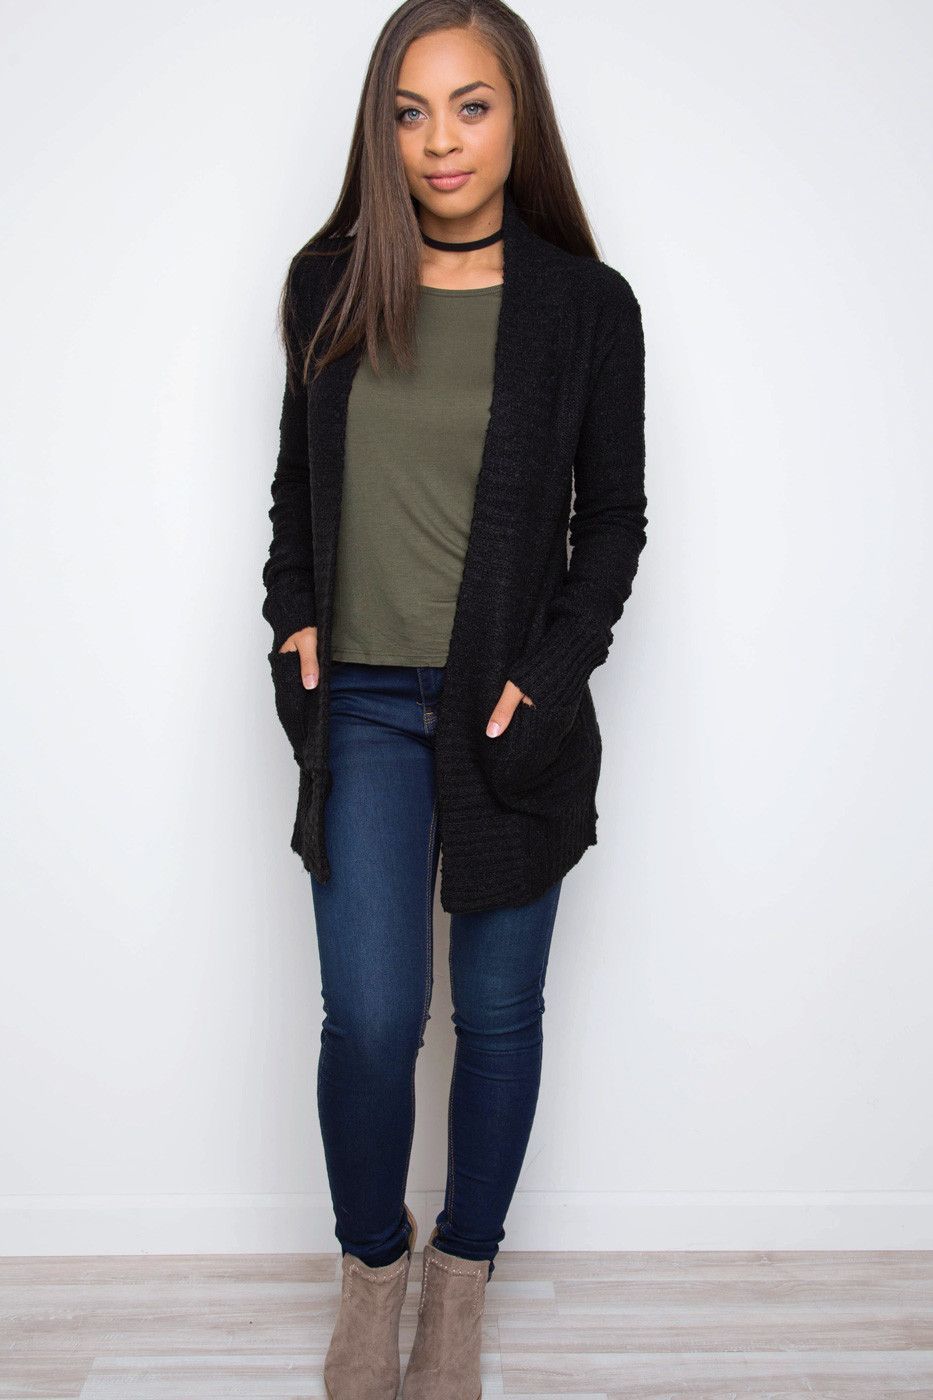 How To Style Long Black Cardigan